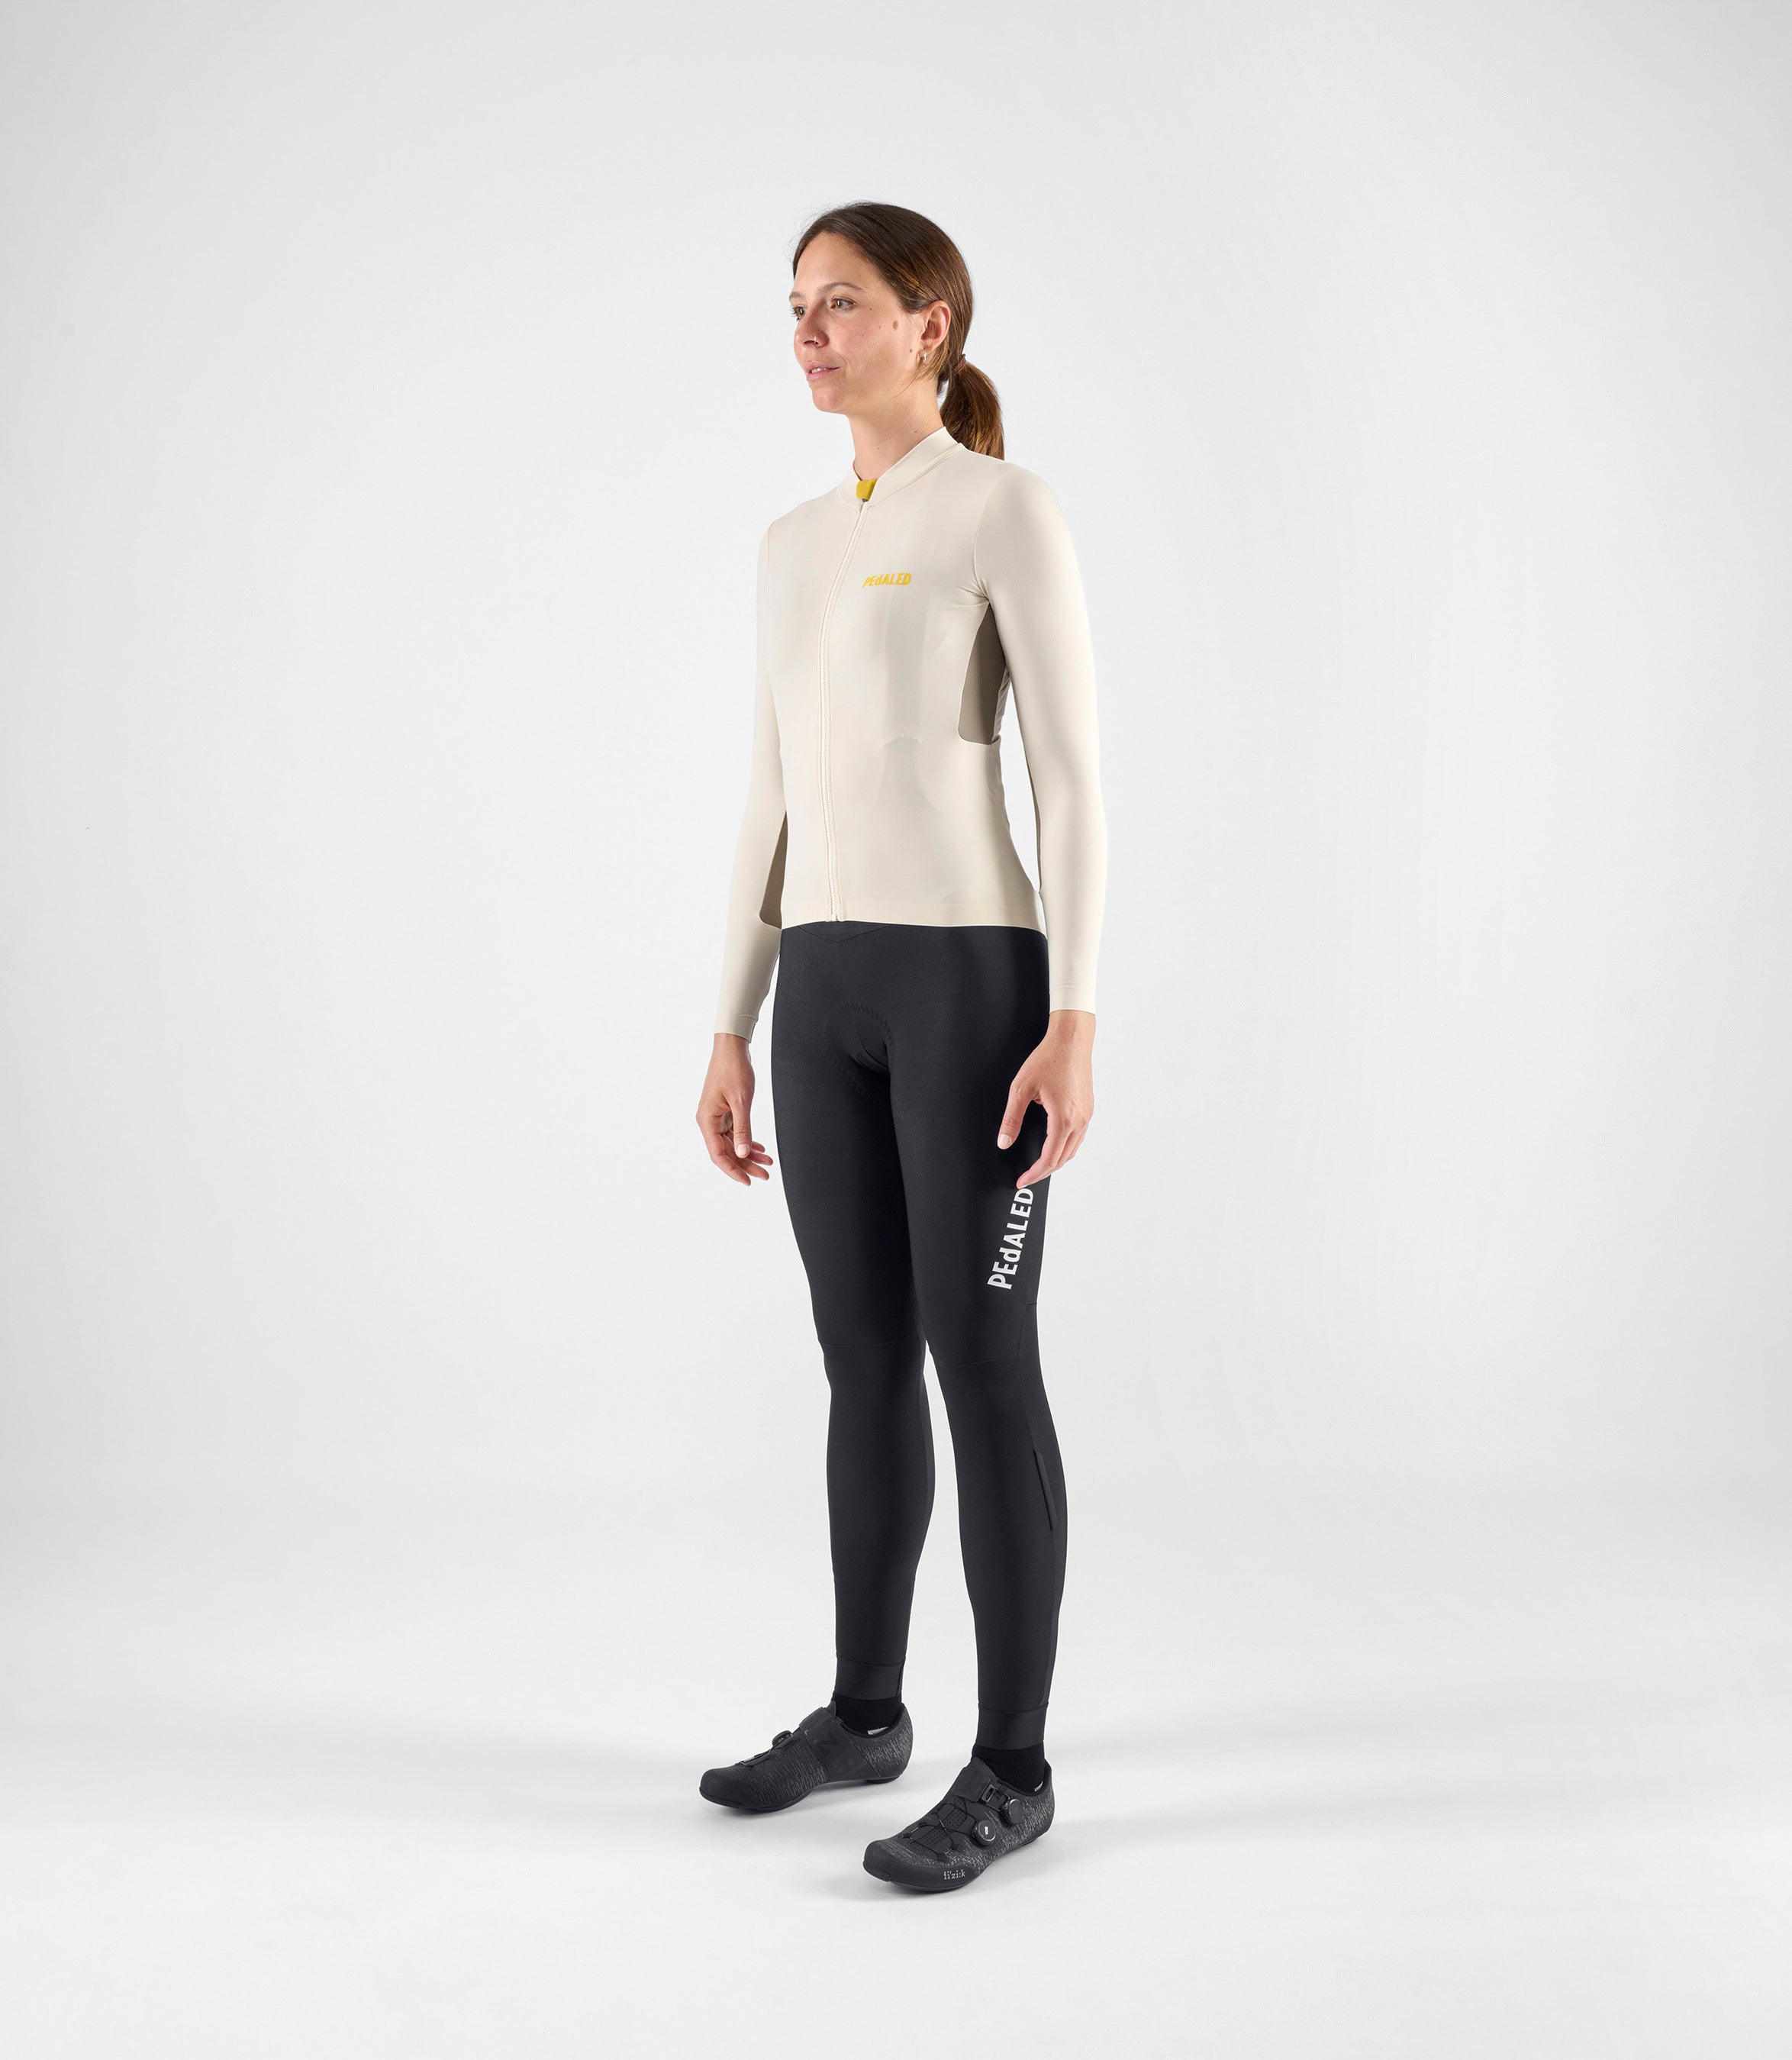 W4WJSEL0GPE_3_women cycling jersey long sleeve off white element total body front pedaled